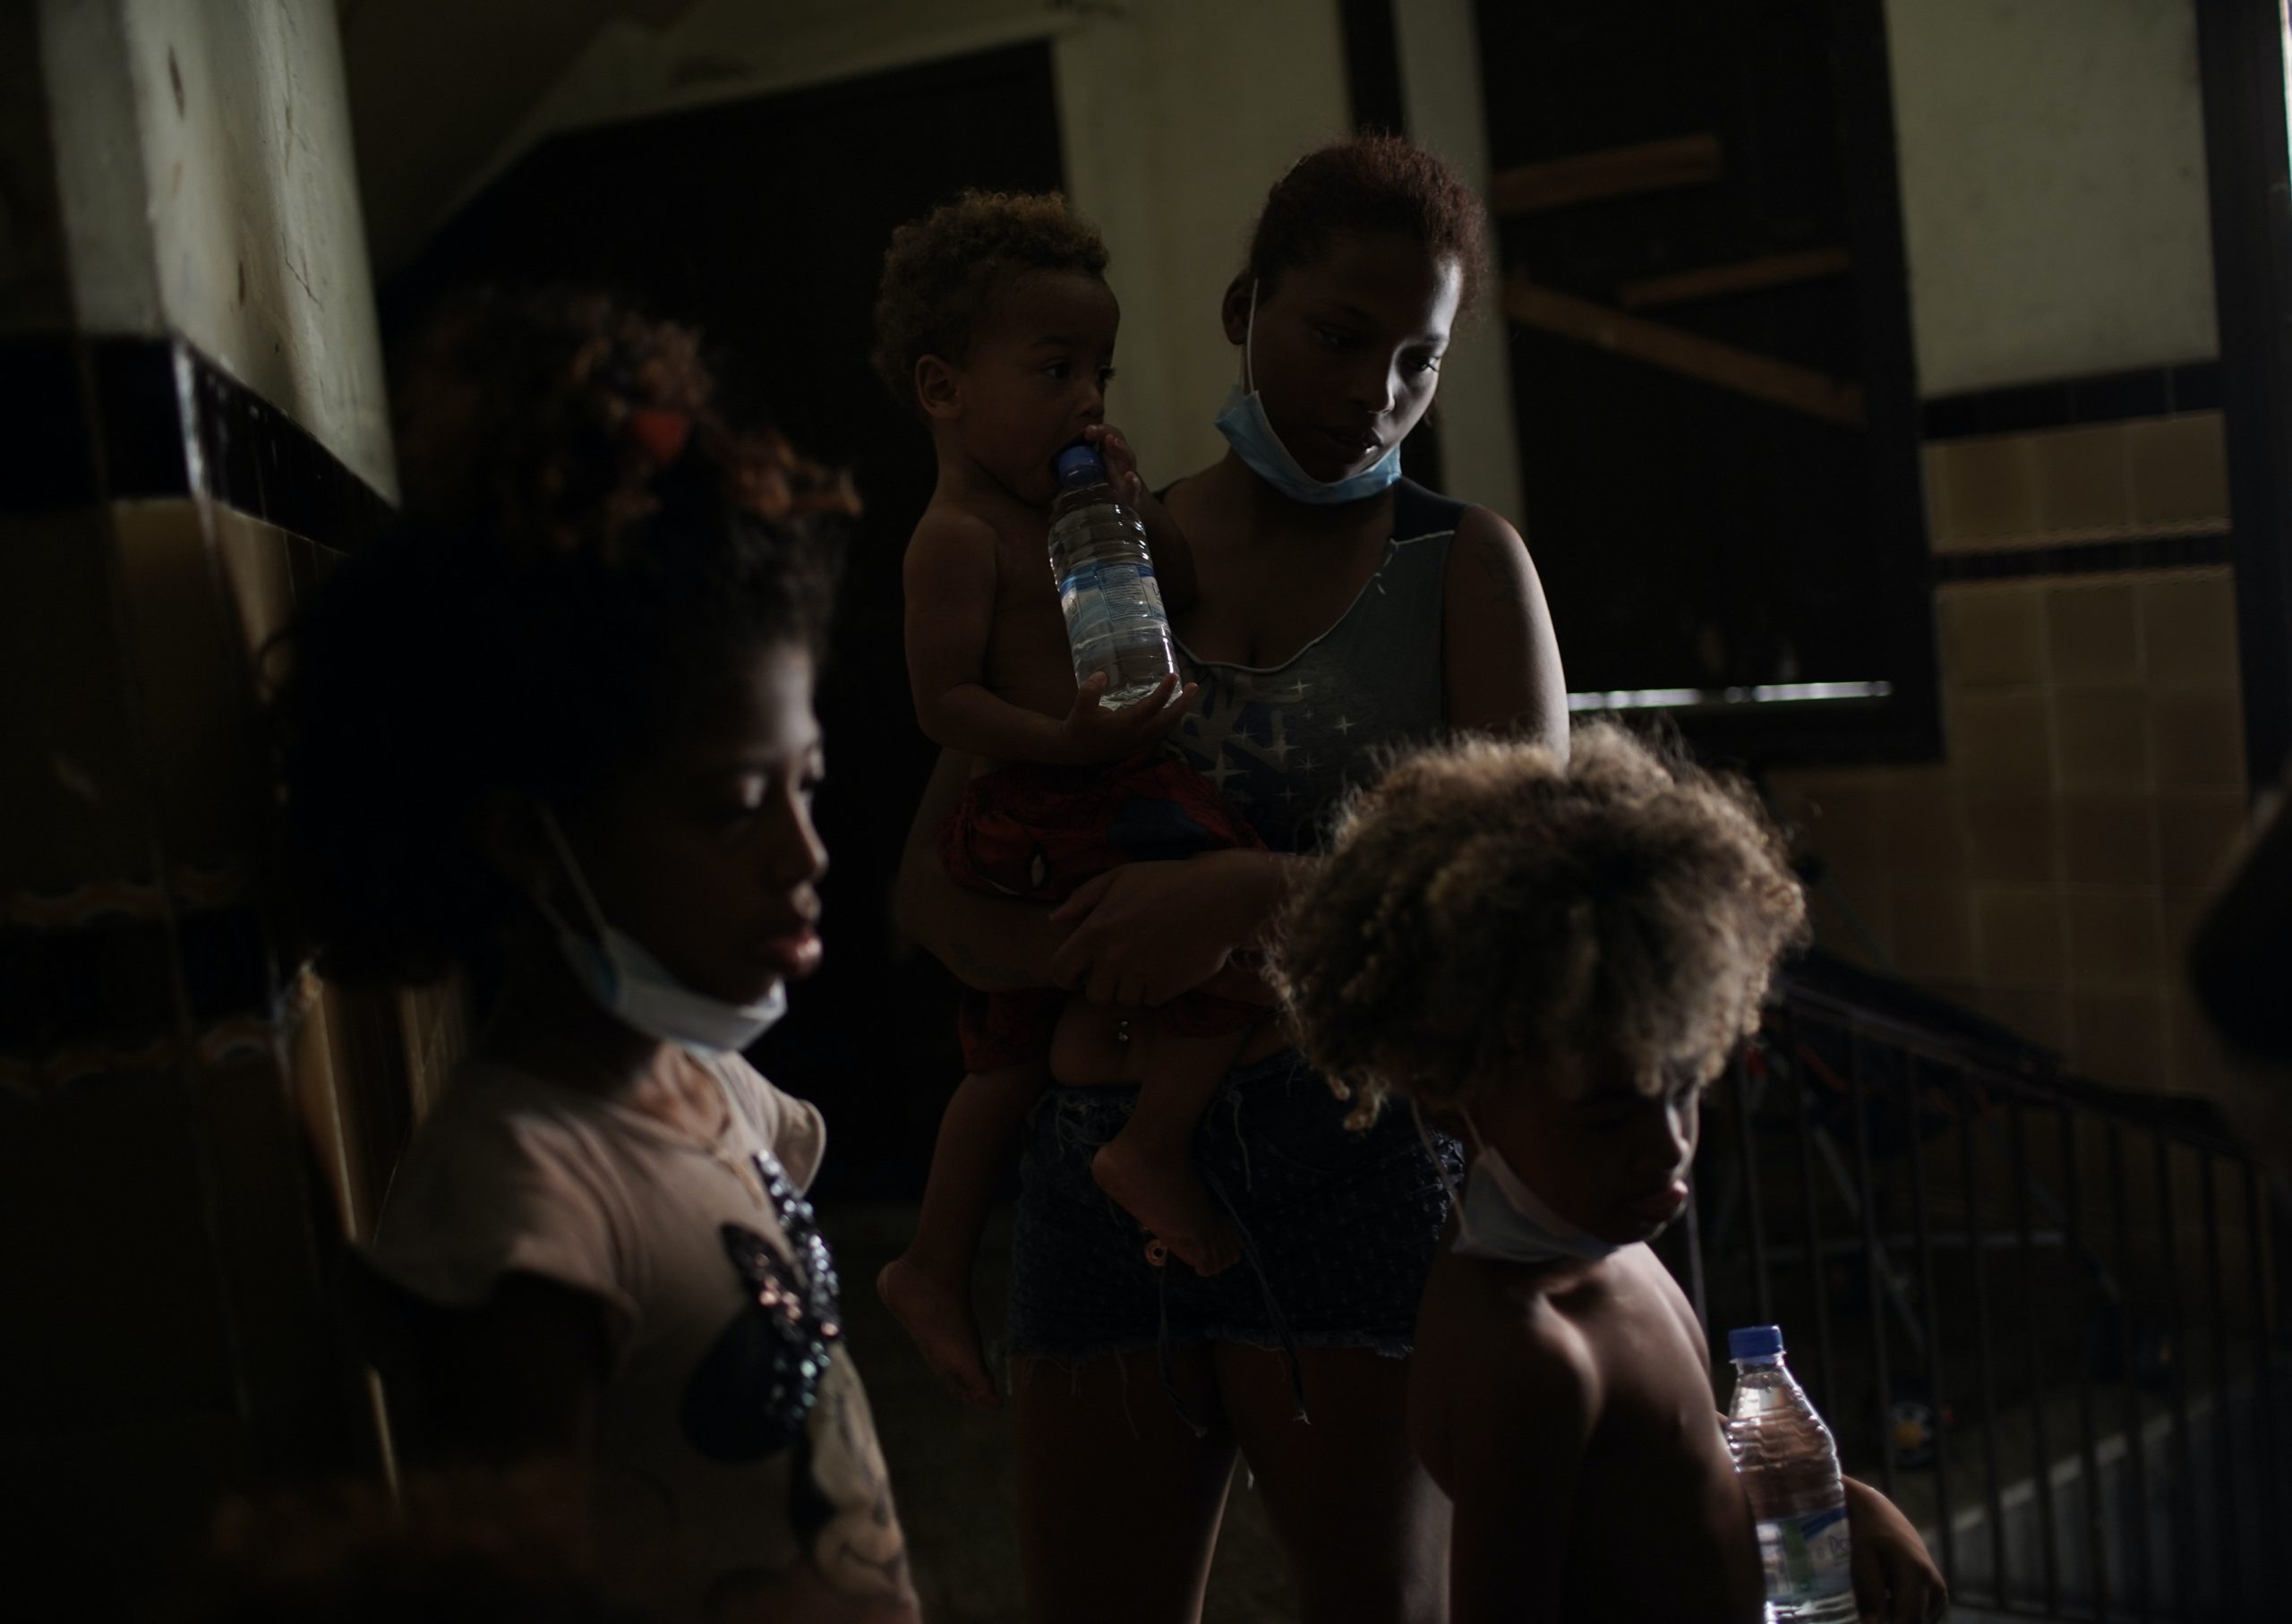 Residents wait to be served a plate of food donated by aid groups, inside an occupied building amid the new coronavirus pandemic, in Rio de Janeiro, Brazil, on March 10, 2021.